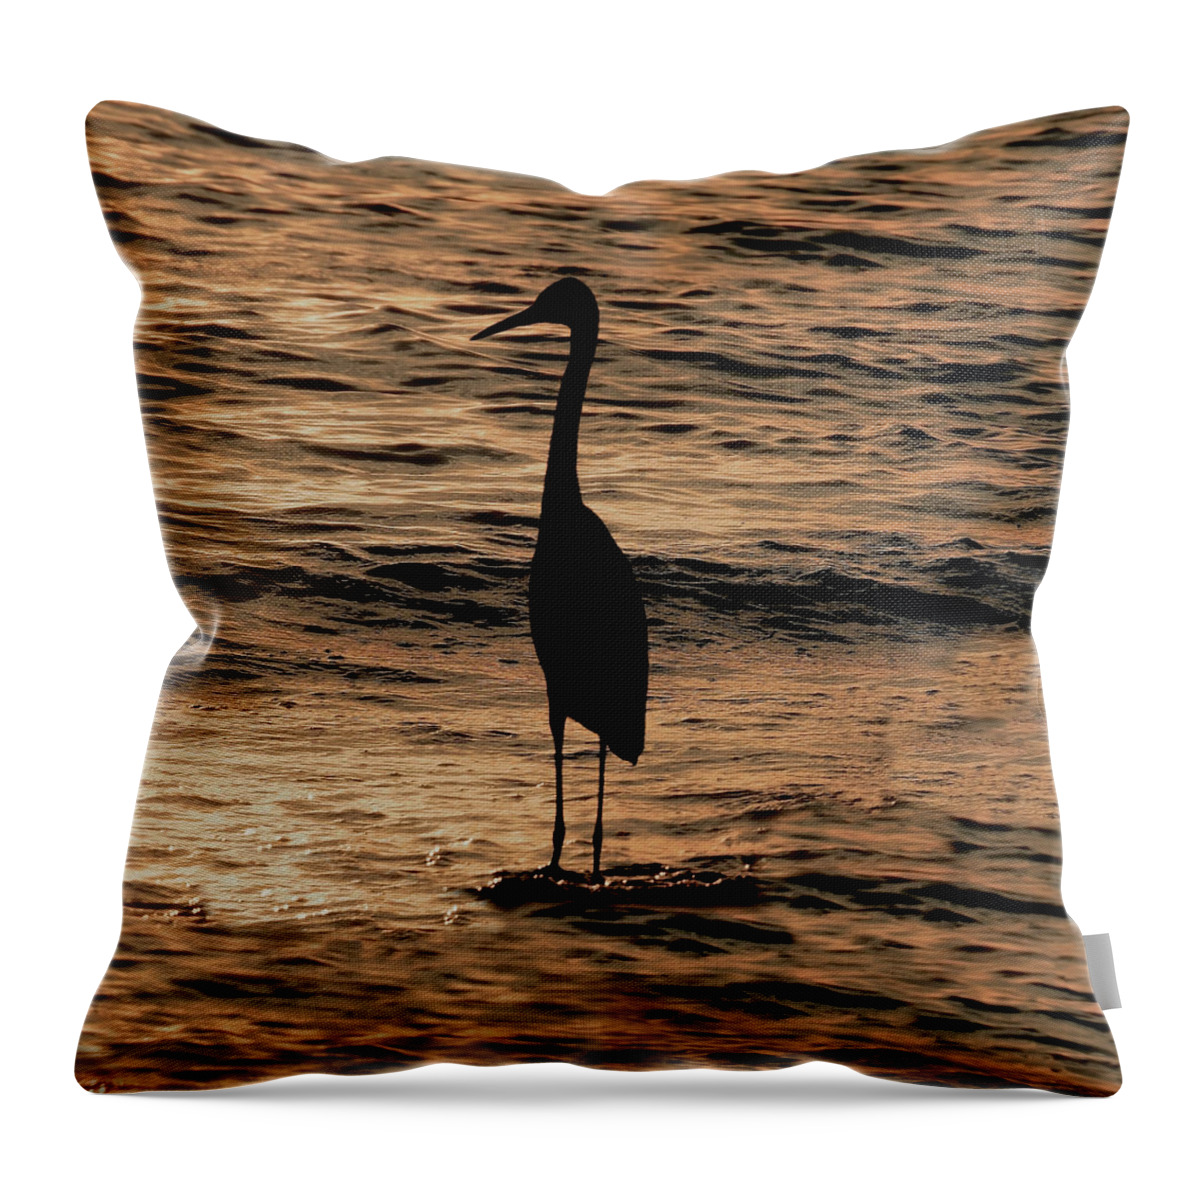 Heron Throw Pillow featuring the photograph Heron Silhouette #1 by Beth Myer Photography